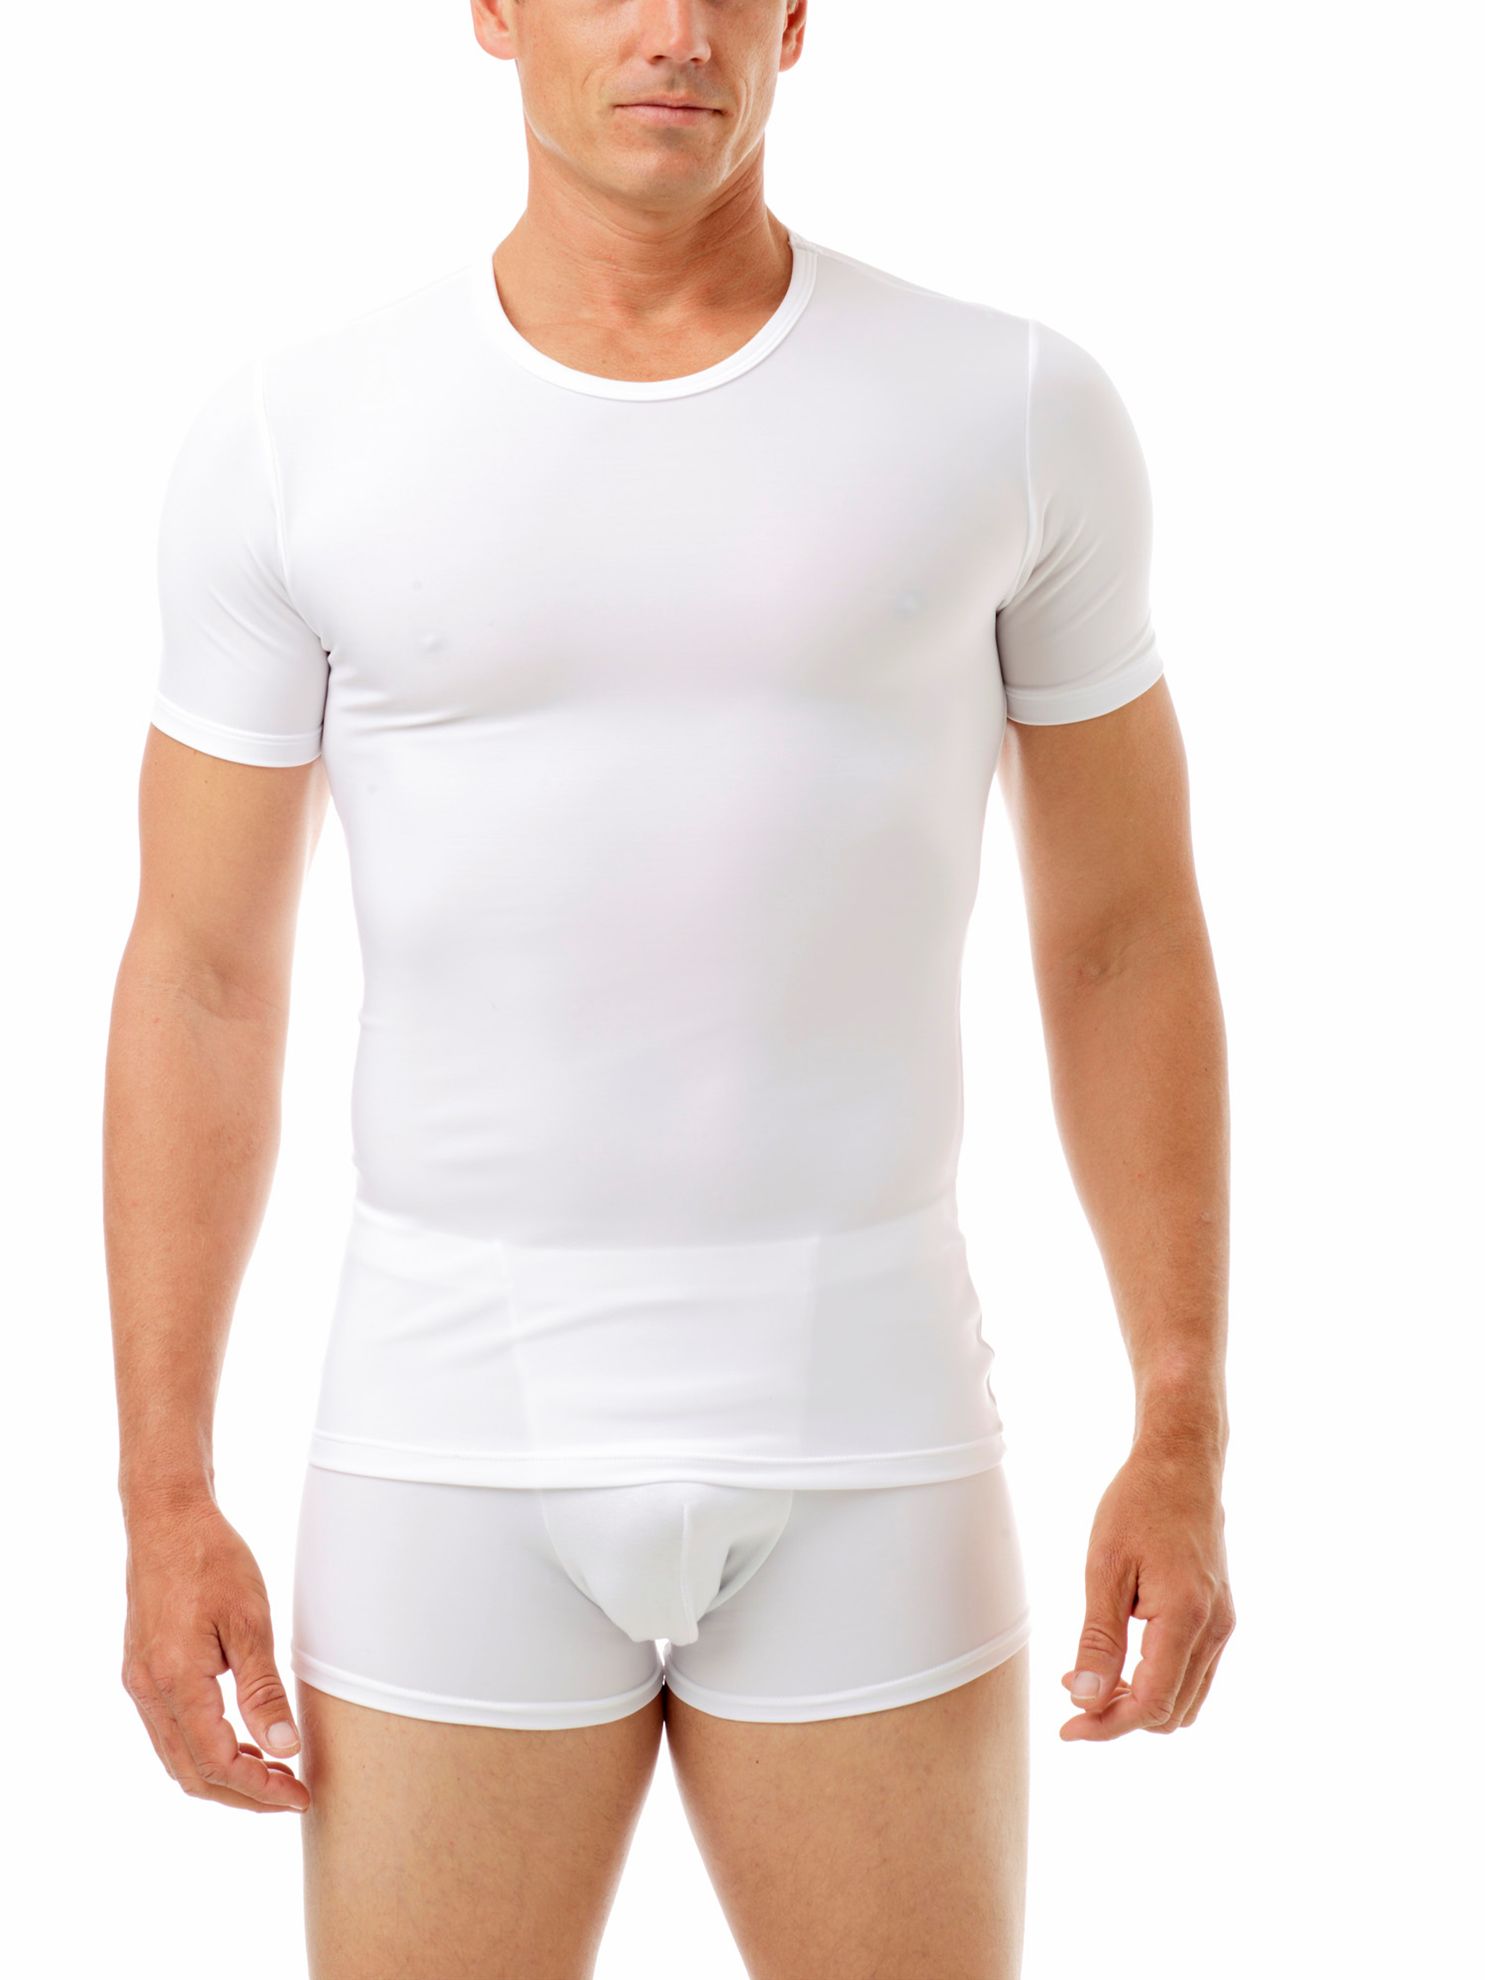 McDavid Sport Compression Shirt With Short Sleeves, White, Adult